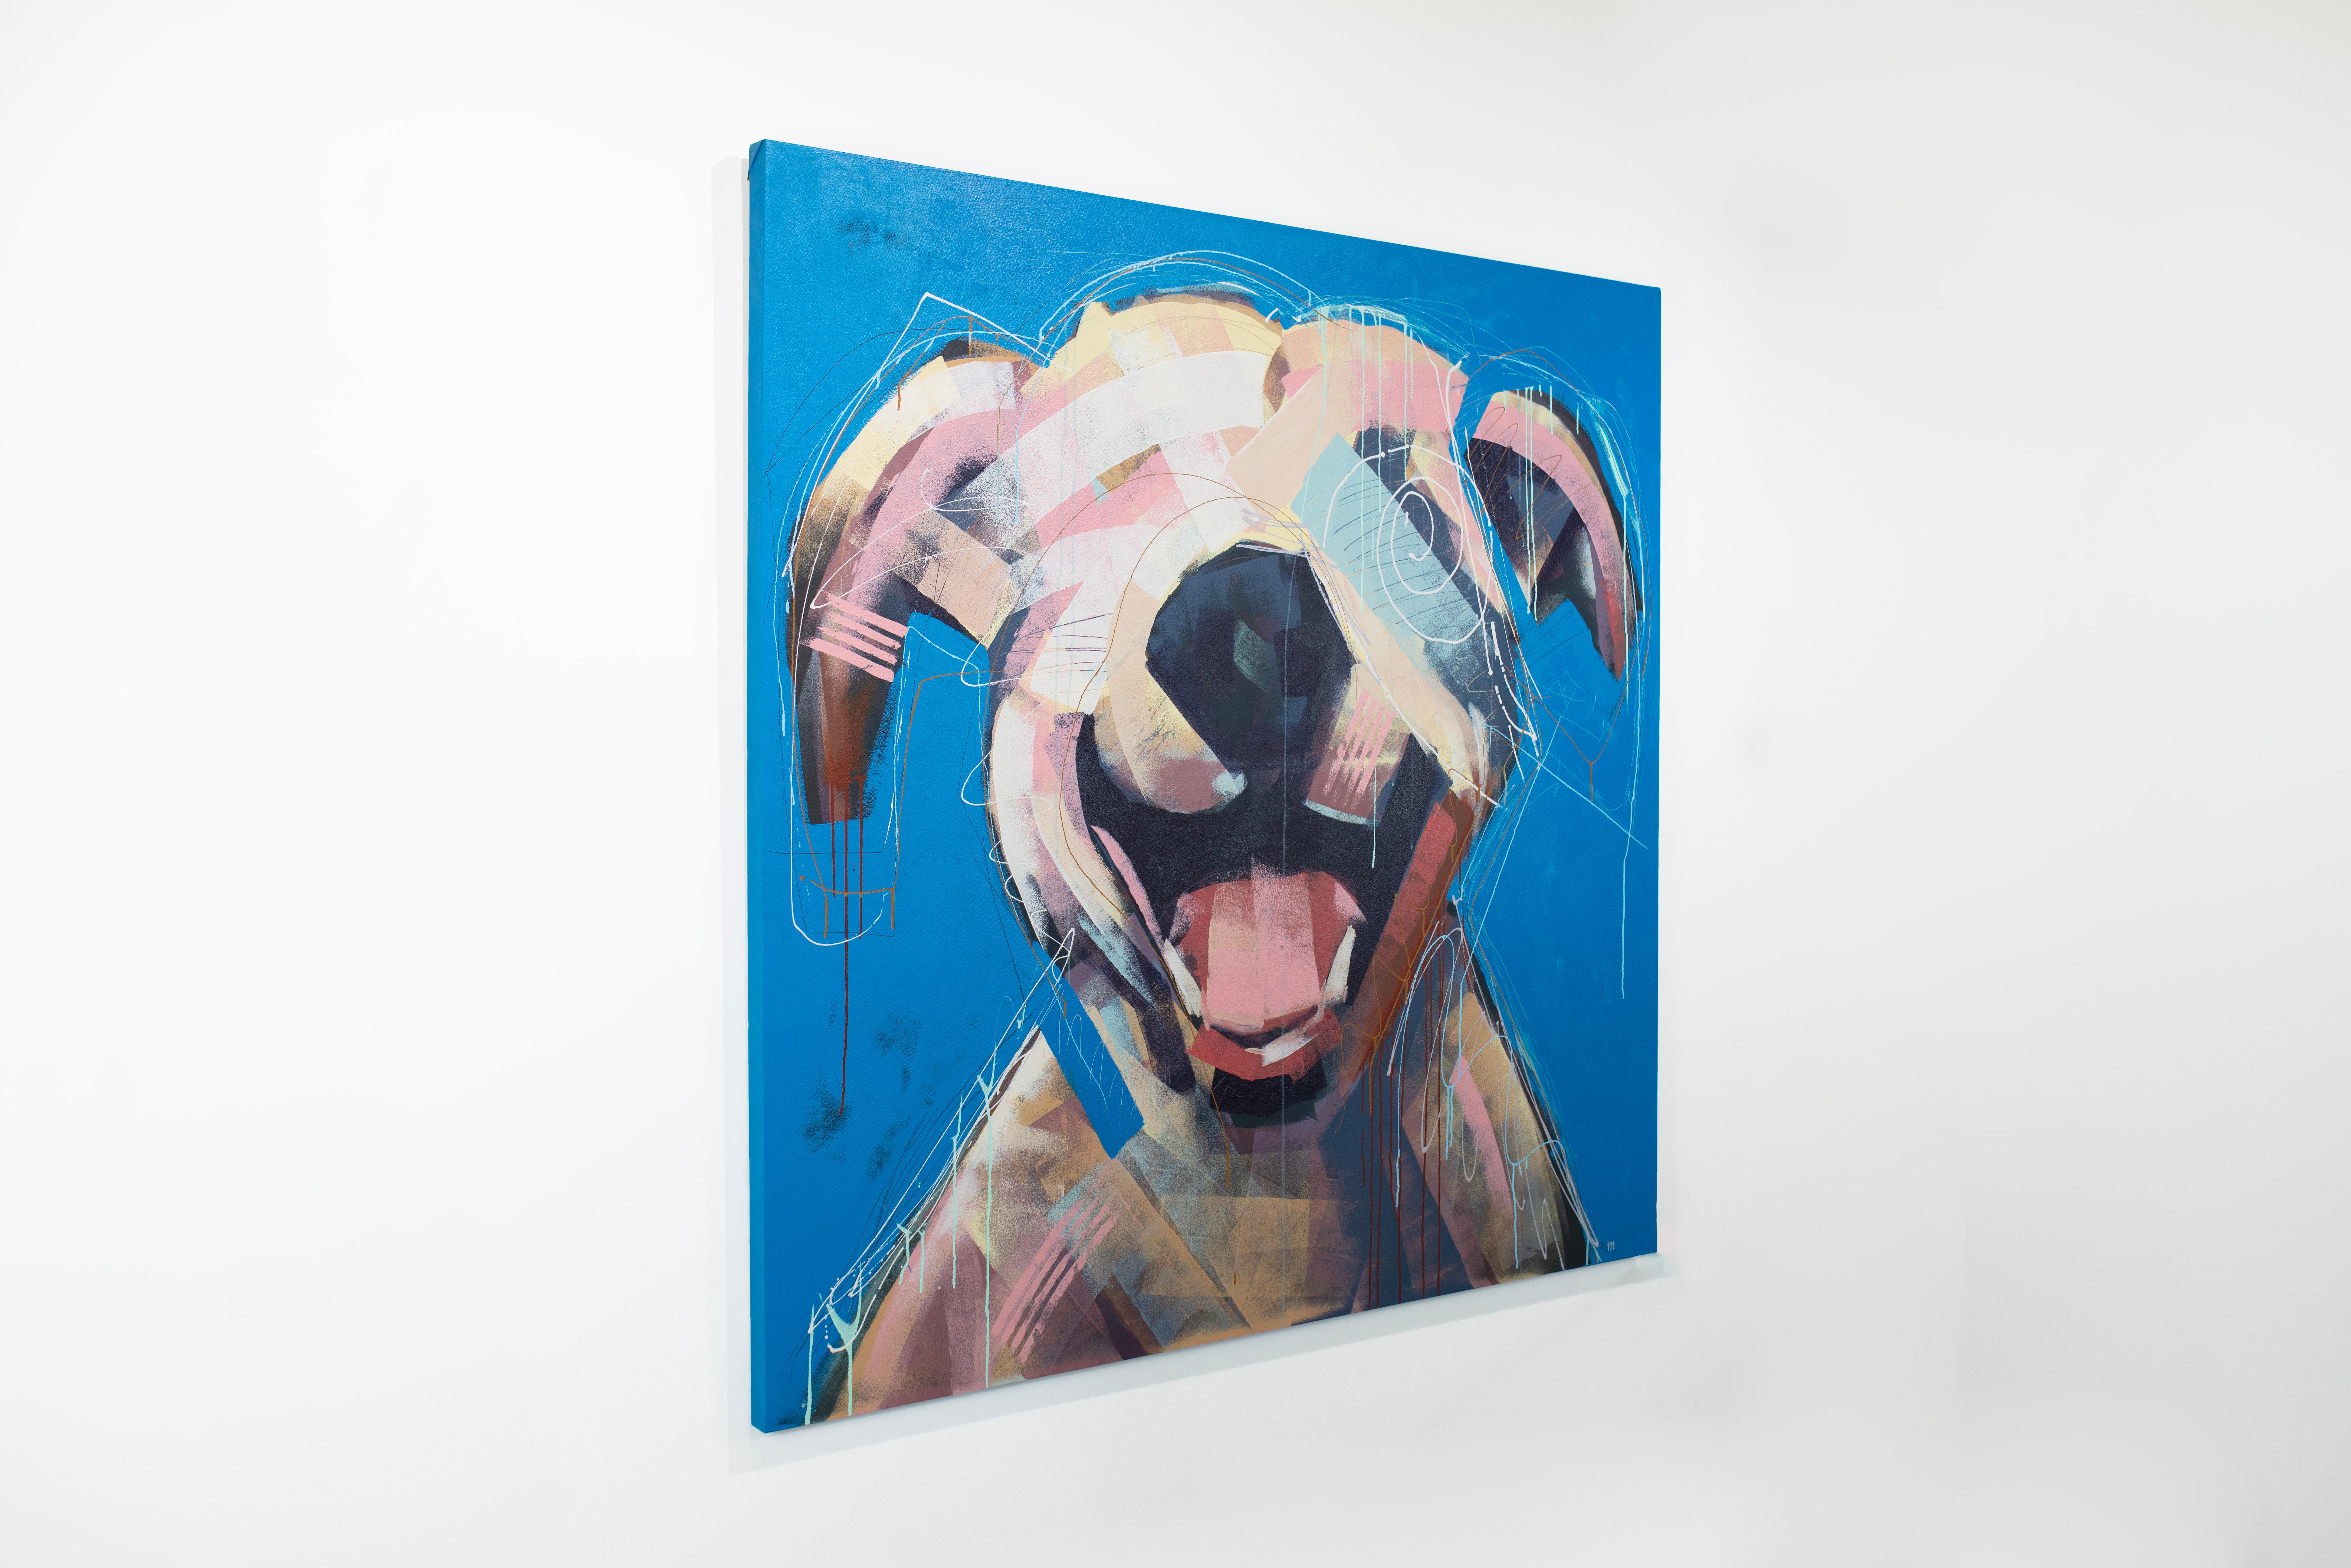 This abstracted painting of a dog features a loose, energetic style and vibrant colors. The artist layers wide brush strokes and thin, swirling white lines to create the dog's colorful form, with a blue background. The painting is made with acrylic